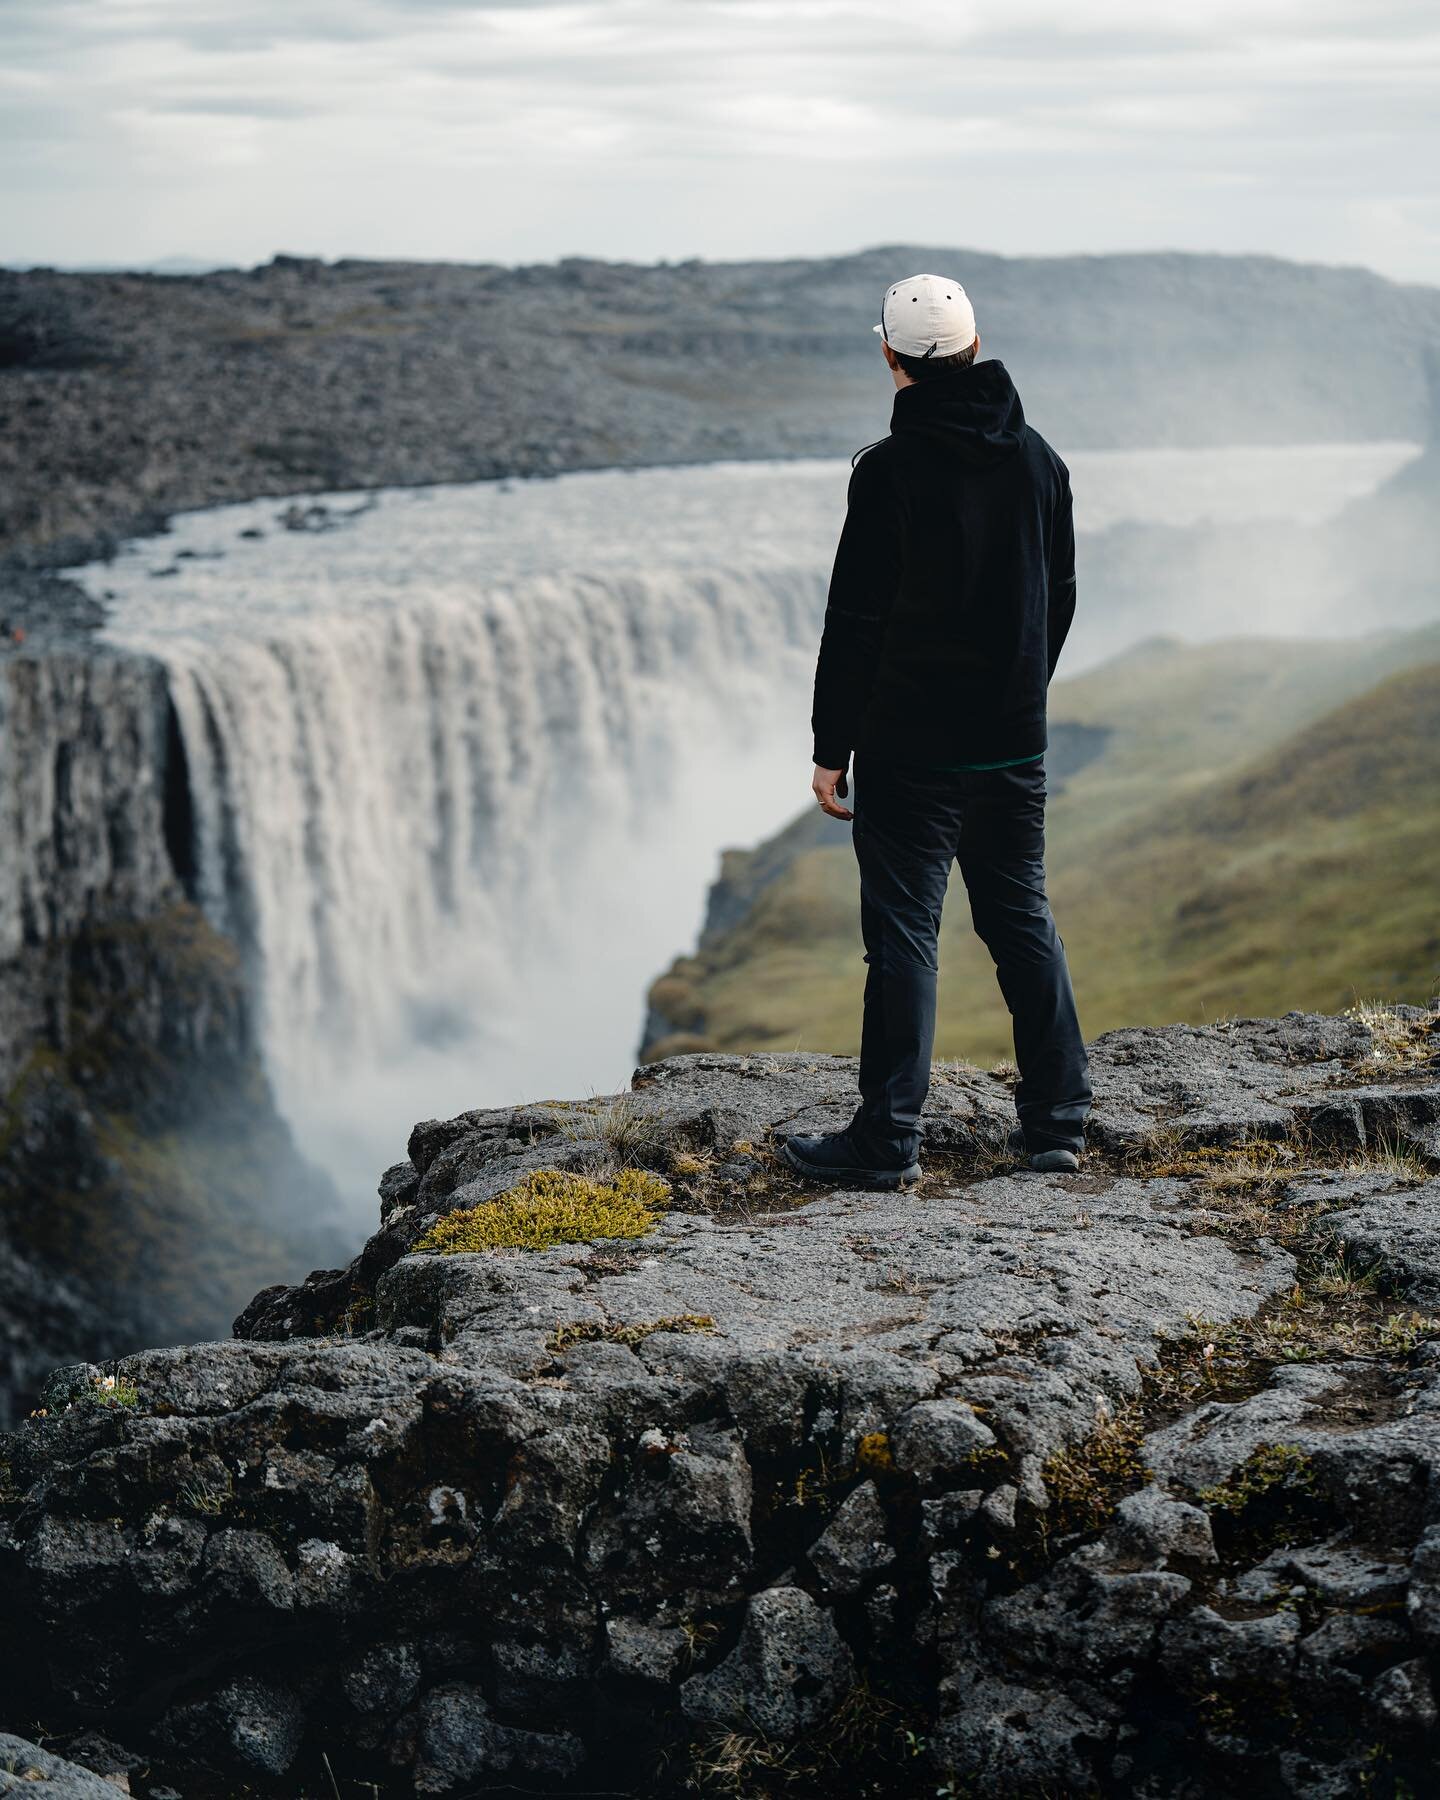 Dettifoss - &bdquo;only&ldquo; 40m high but 100m long. This amount of water is just crazy! 

#iceland #visiticeland #icelandscape #icelandtravel #dettifoss #waterfall #crazy #water #nature #foss #portraitphotography #portrait #superdry #naturephotogr